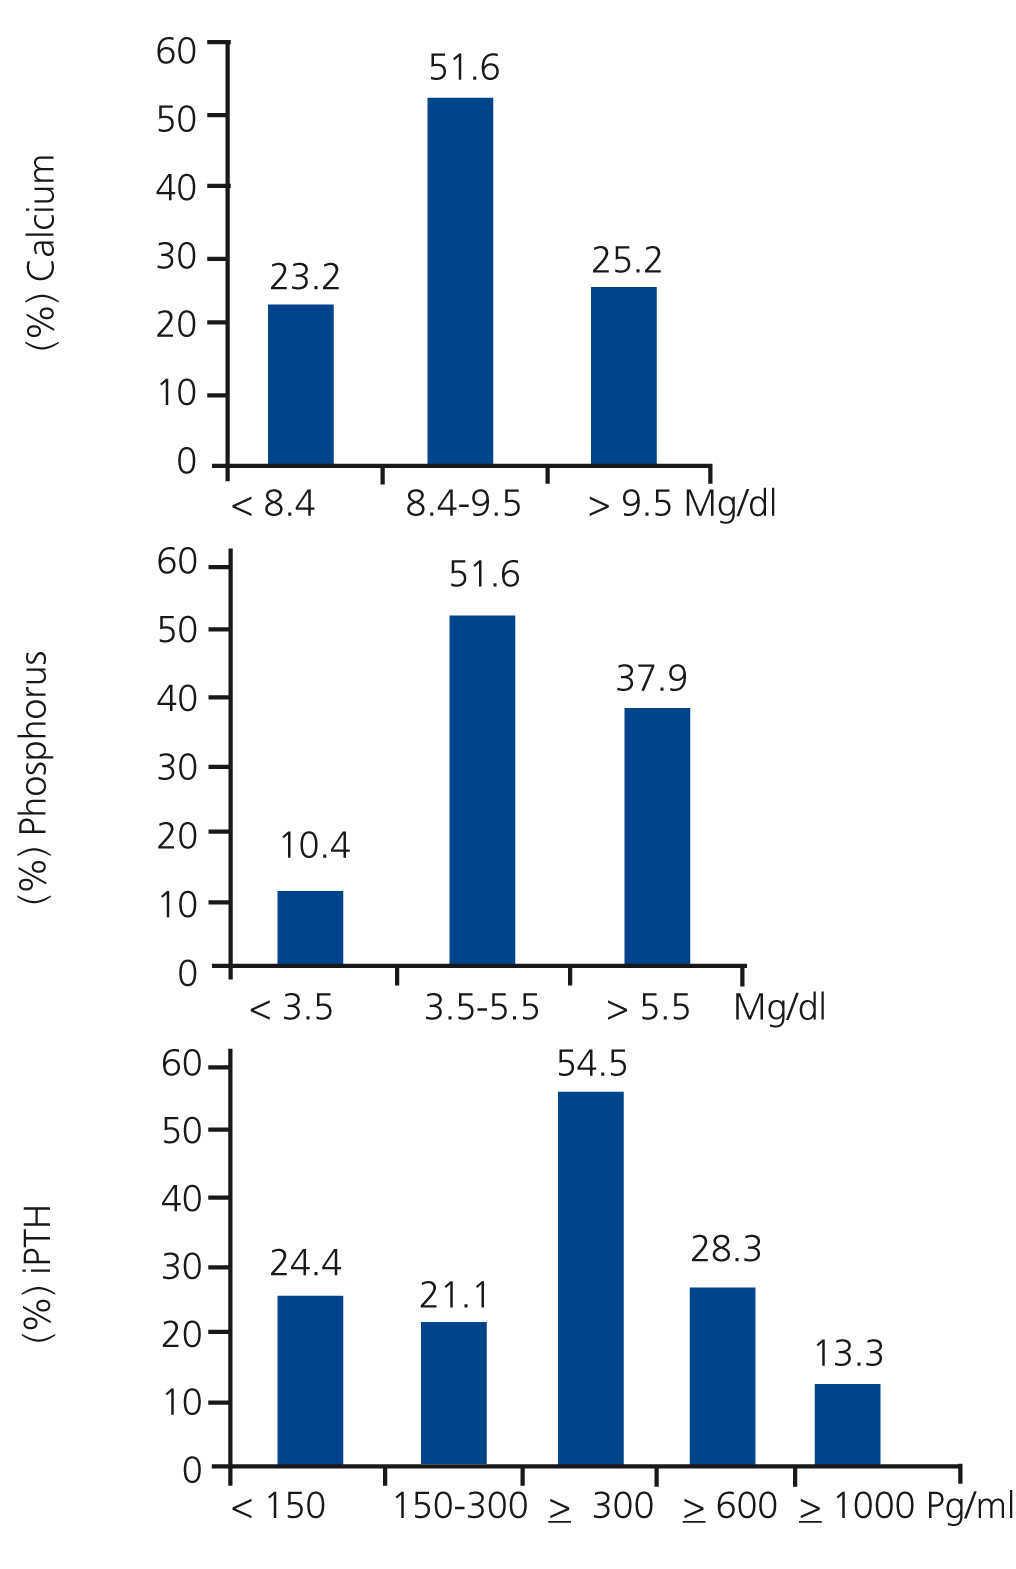 High Prevalence Of Secondary Hyperparathyroidism In Chronic Kidney Disease Patients On Dialysis In Argentina Nefrologia